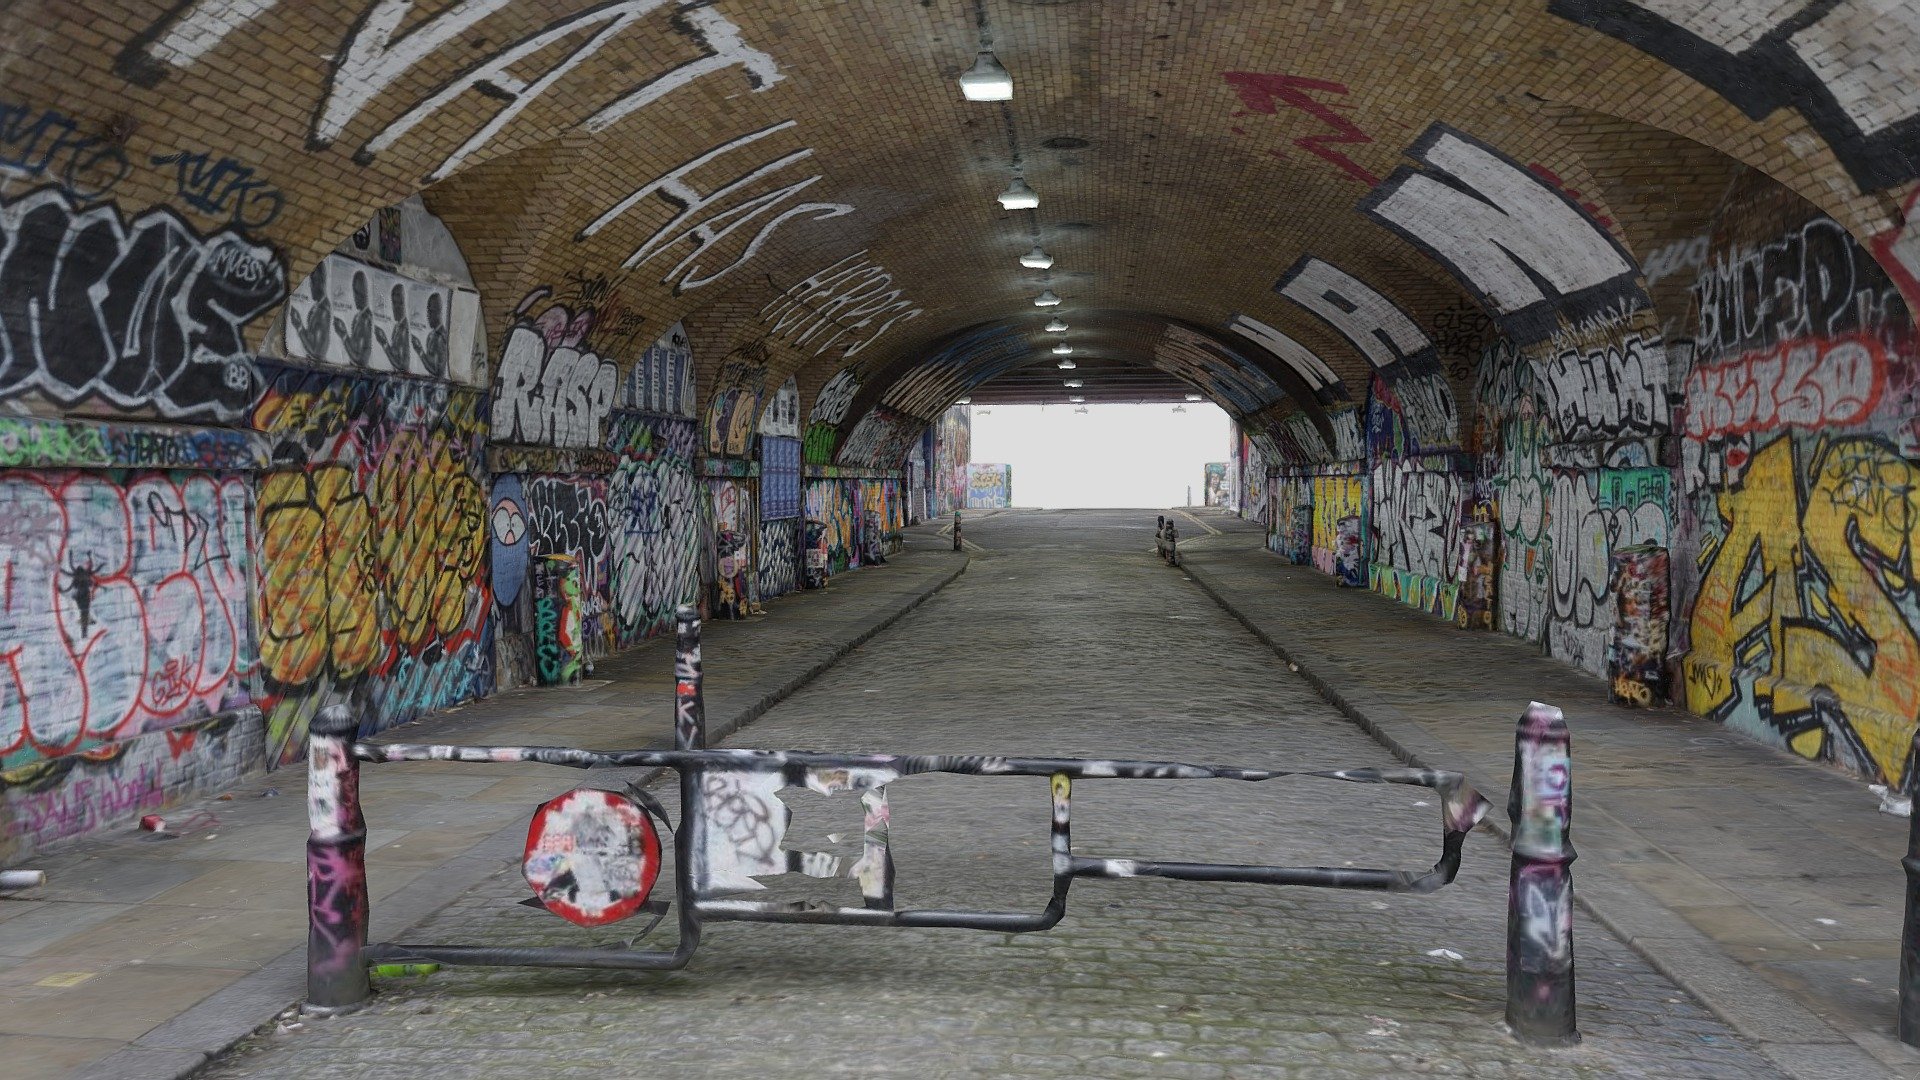 A railway bridge tunnel by Shoreditch High Street Station that is decorated with graffiti and street art. 

2211 photos taken in October 2020 with a Sony a6000 and processed in Agisoft Metashape 3d model